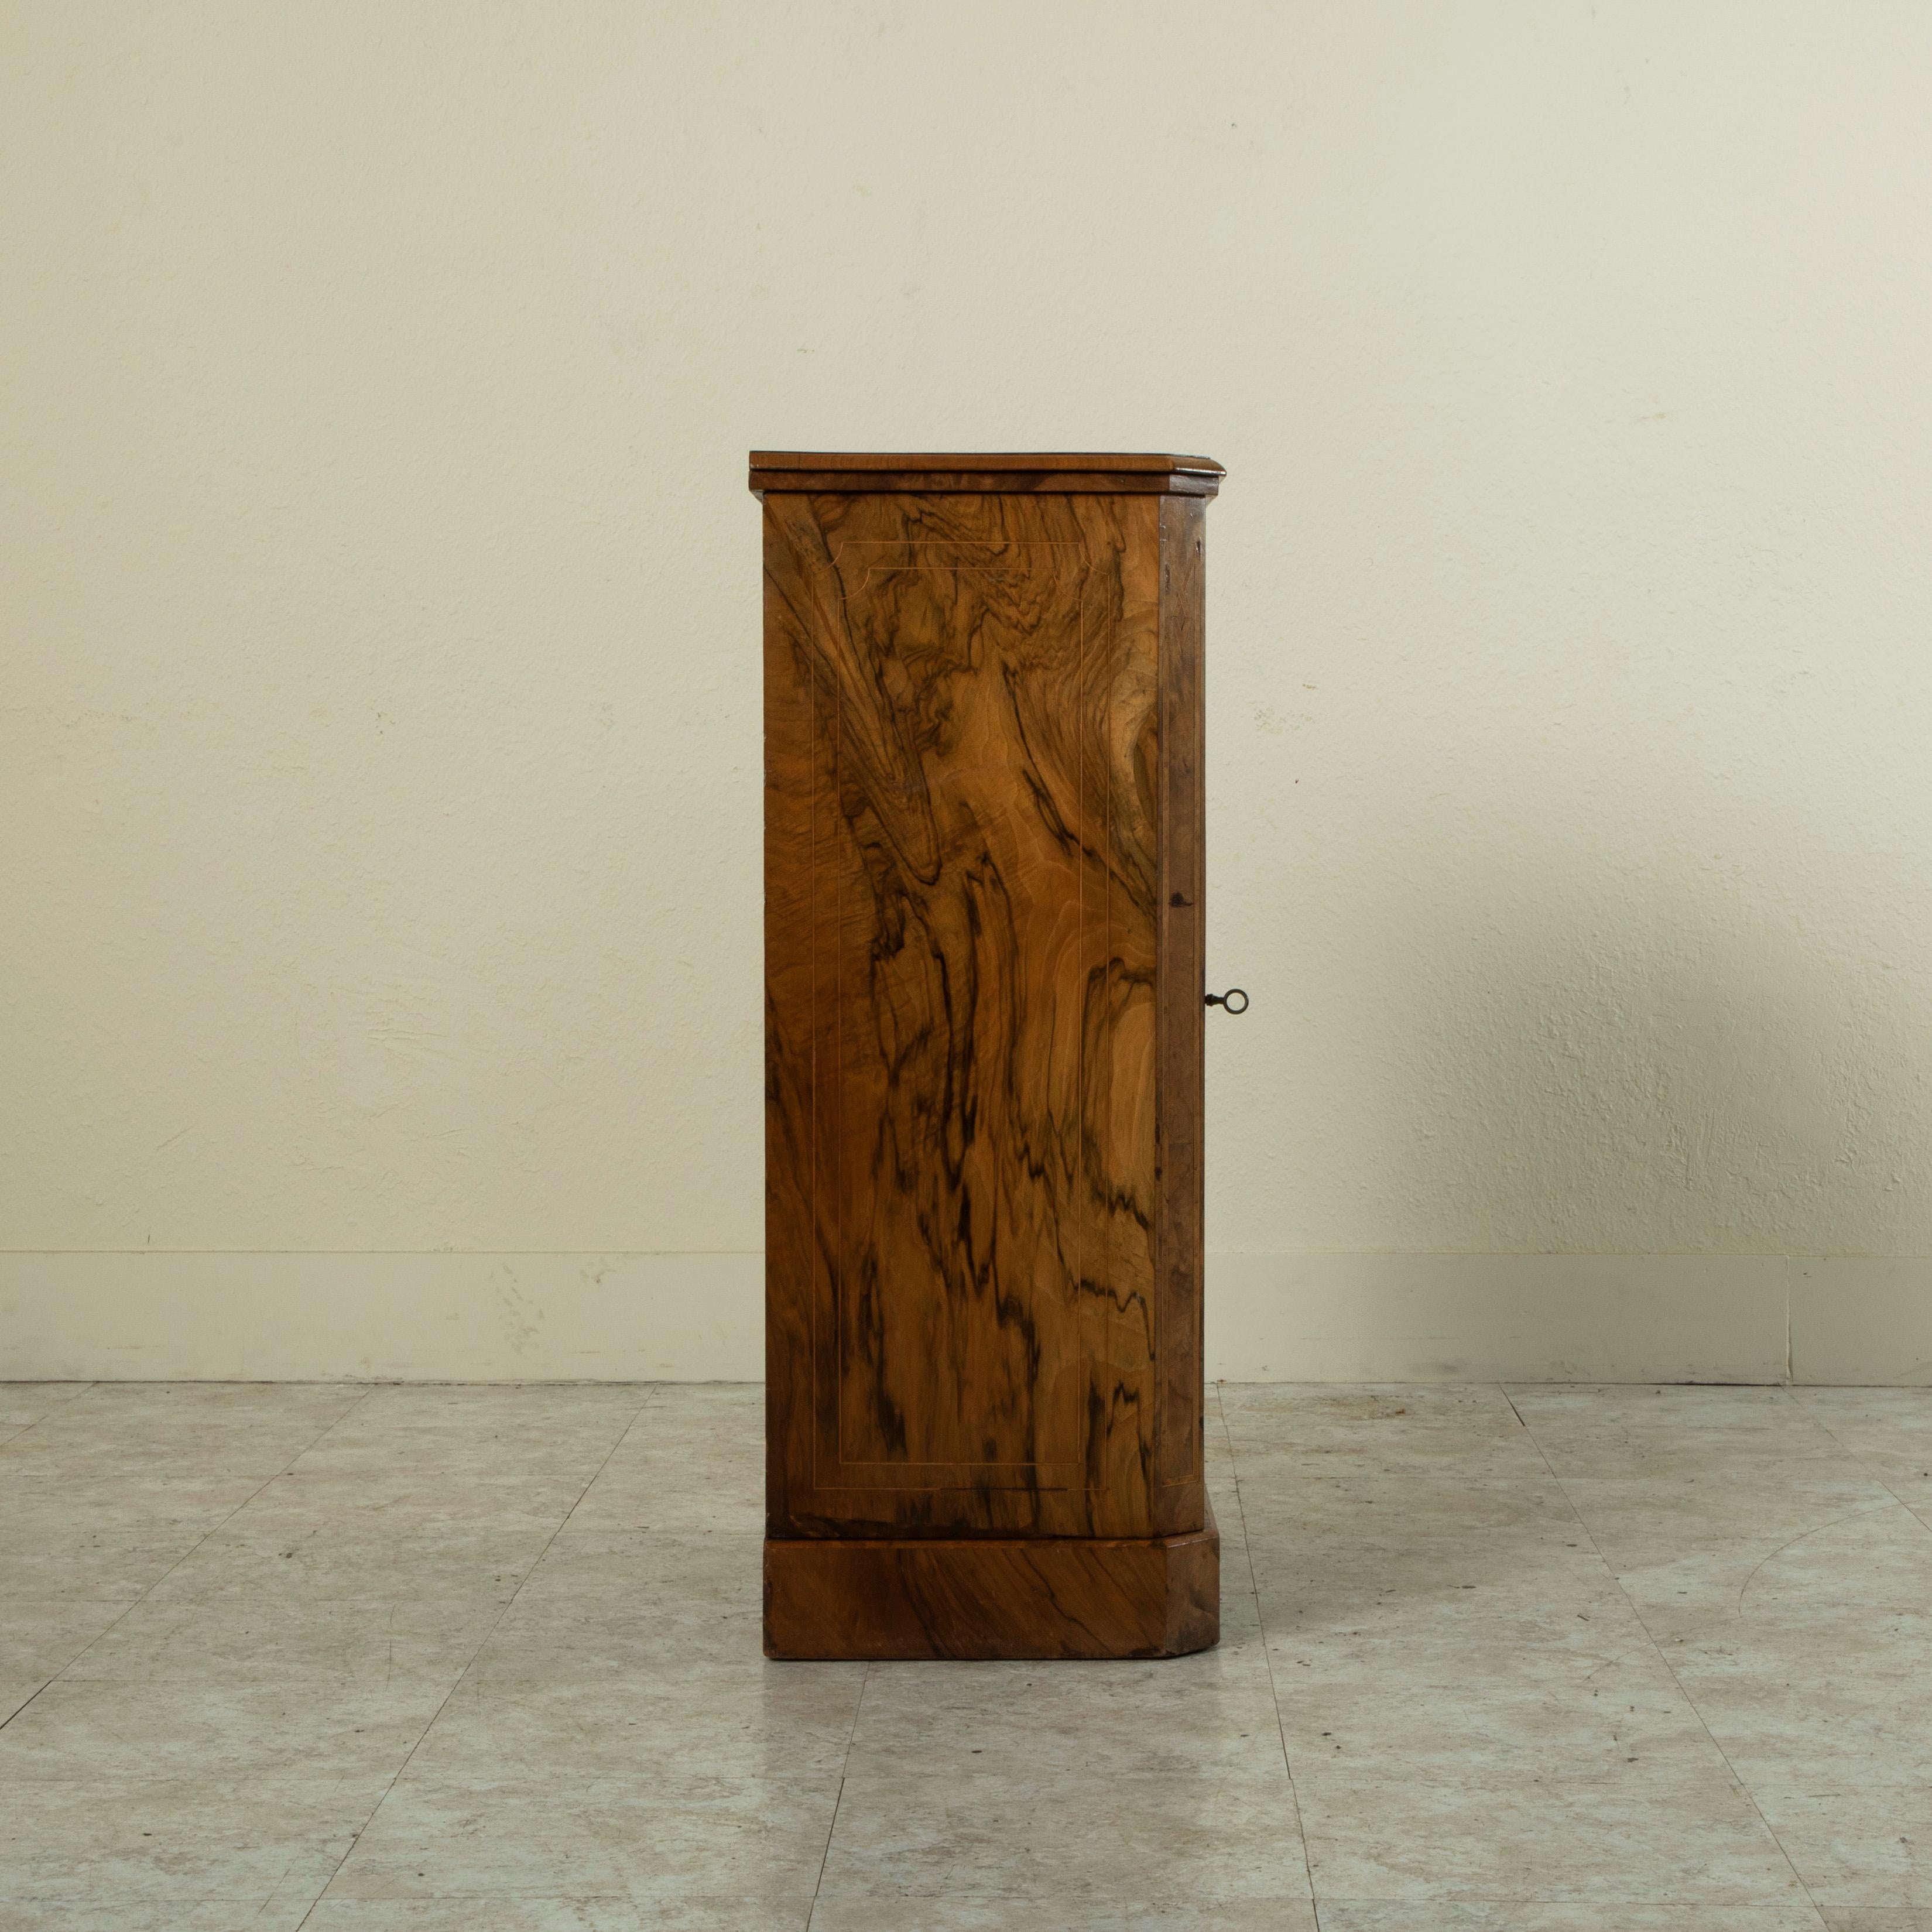 20th Century French Burl Walnut and Lemonwood Marquetry Vitrine or Cabinet, circa 1900 For Sale